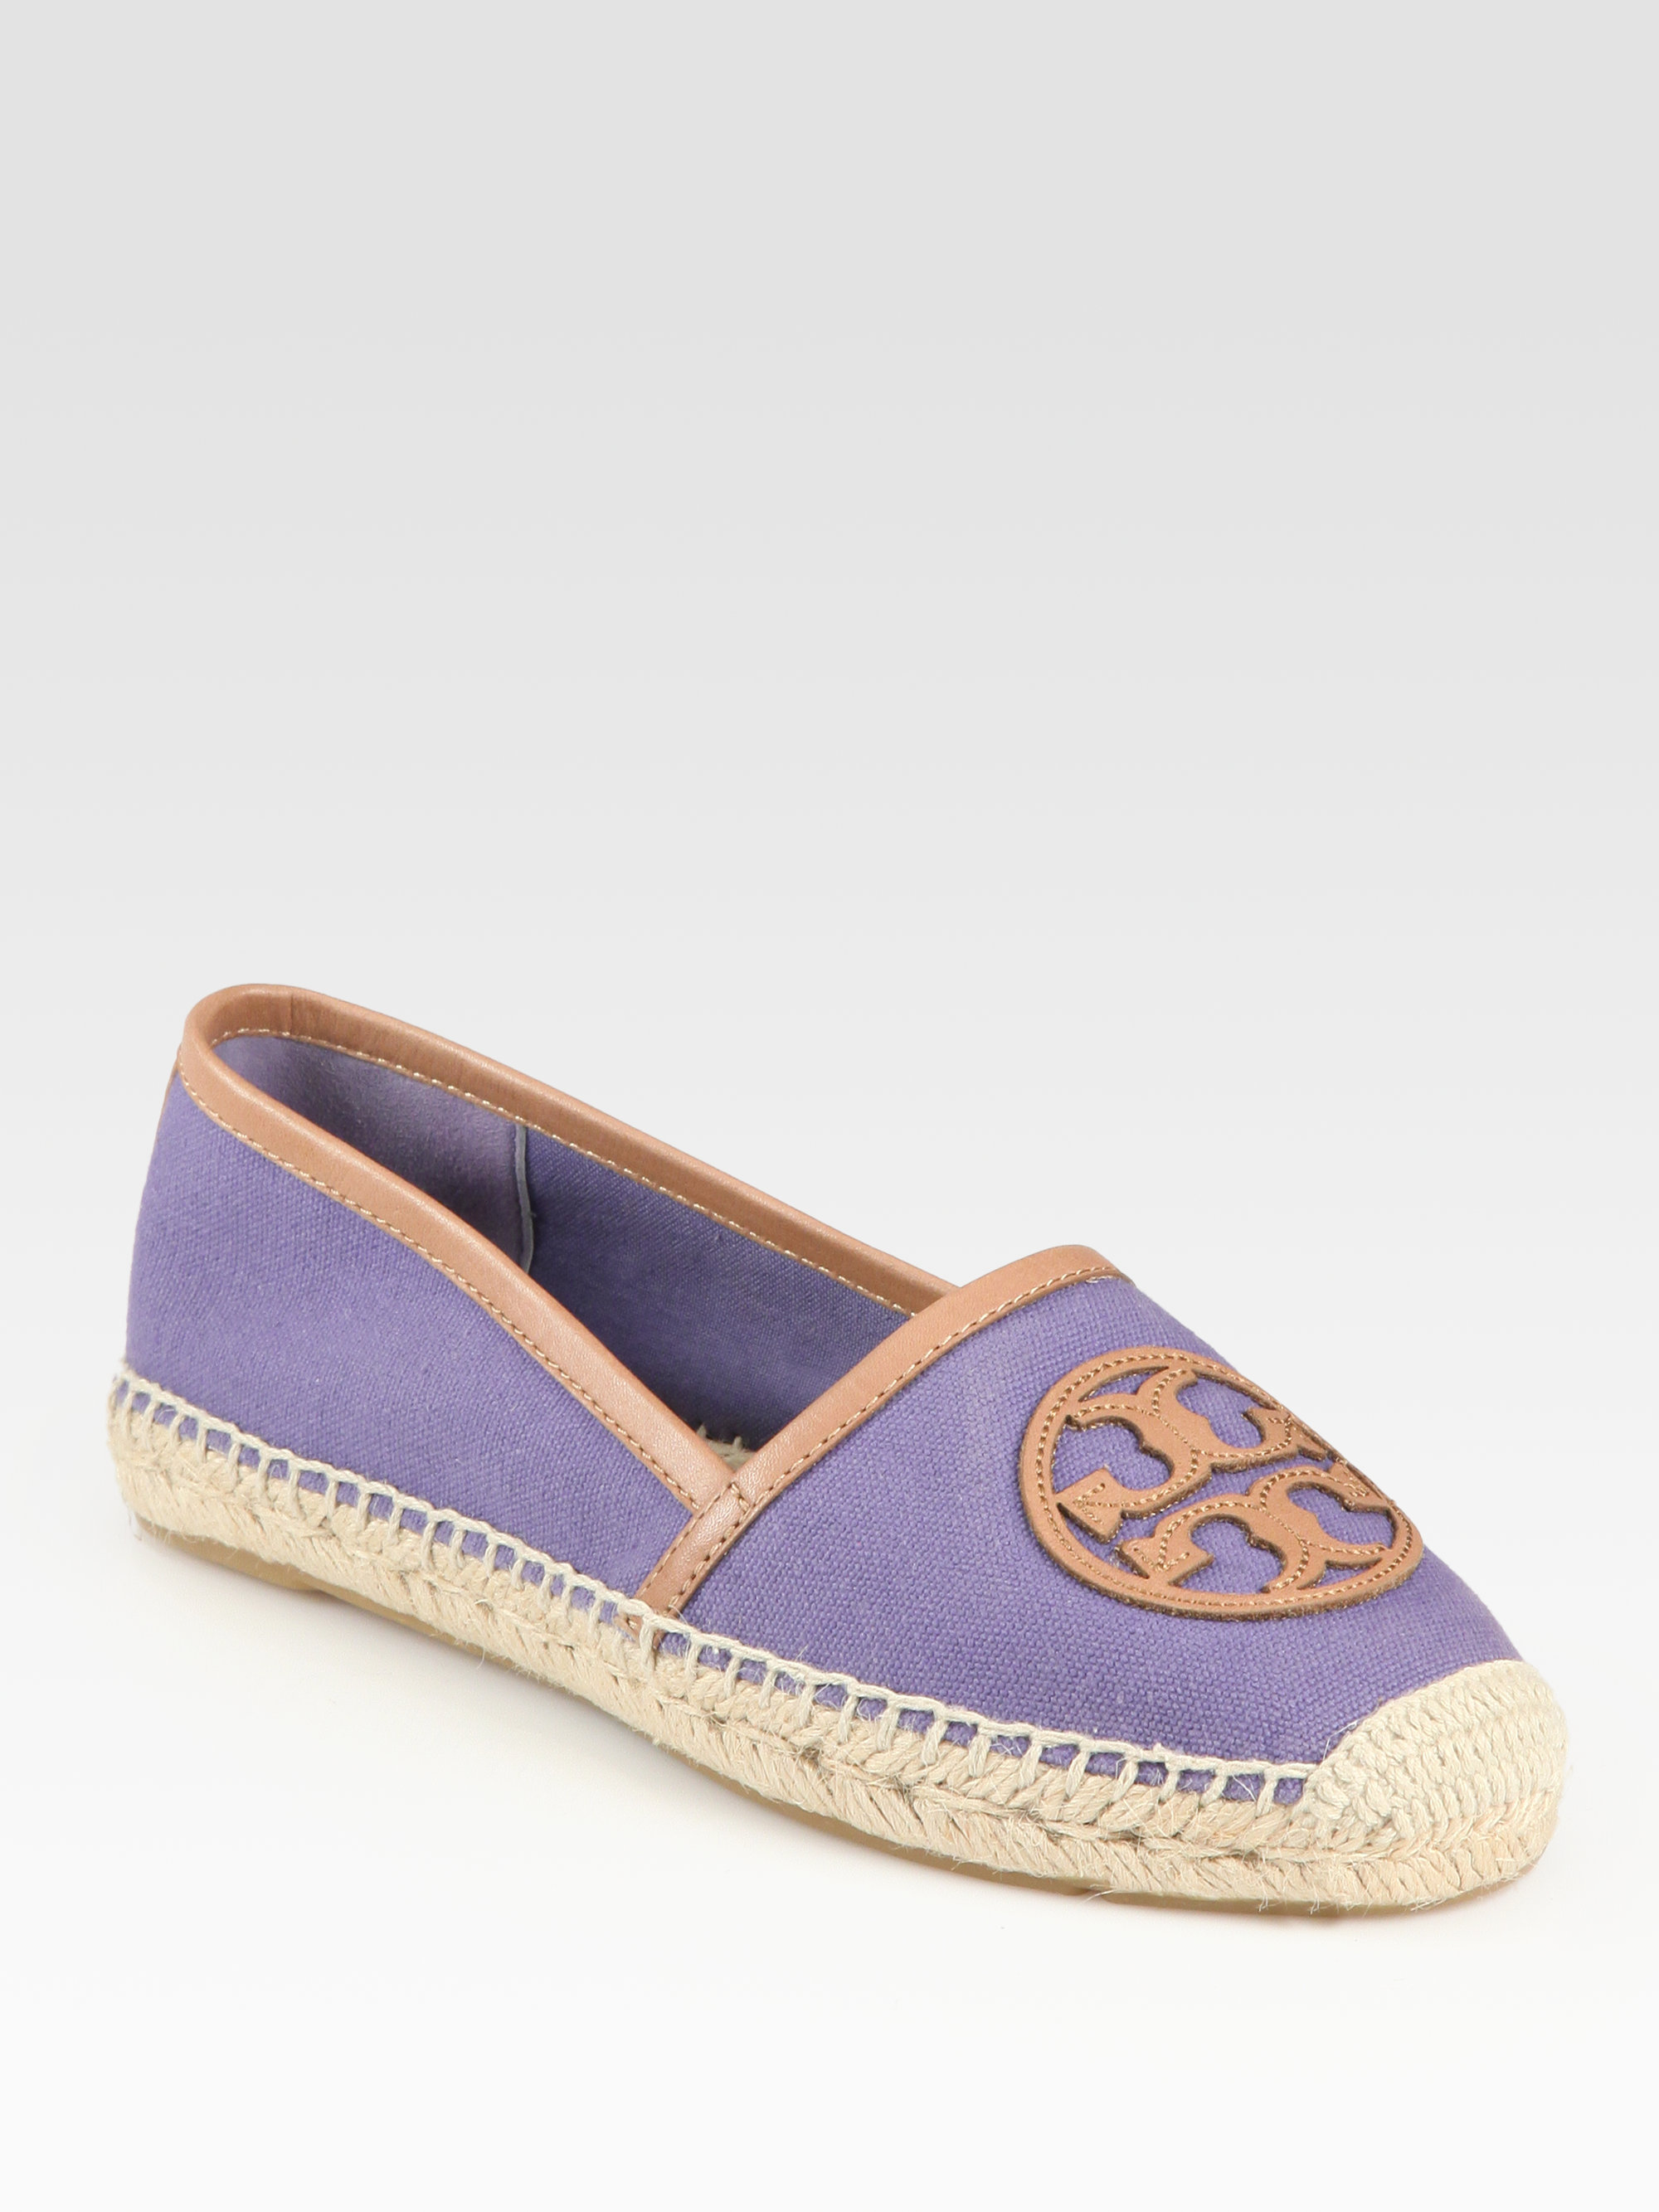 Tory Burch Angus Canvas Leather Logo Espadrilles in Purple - Lyst